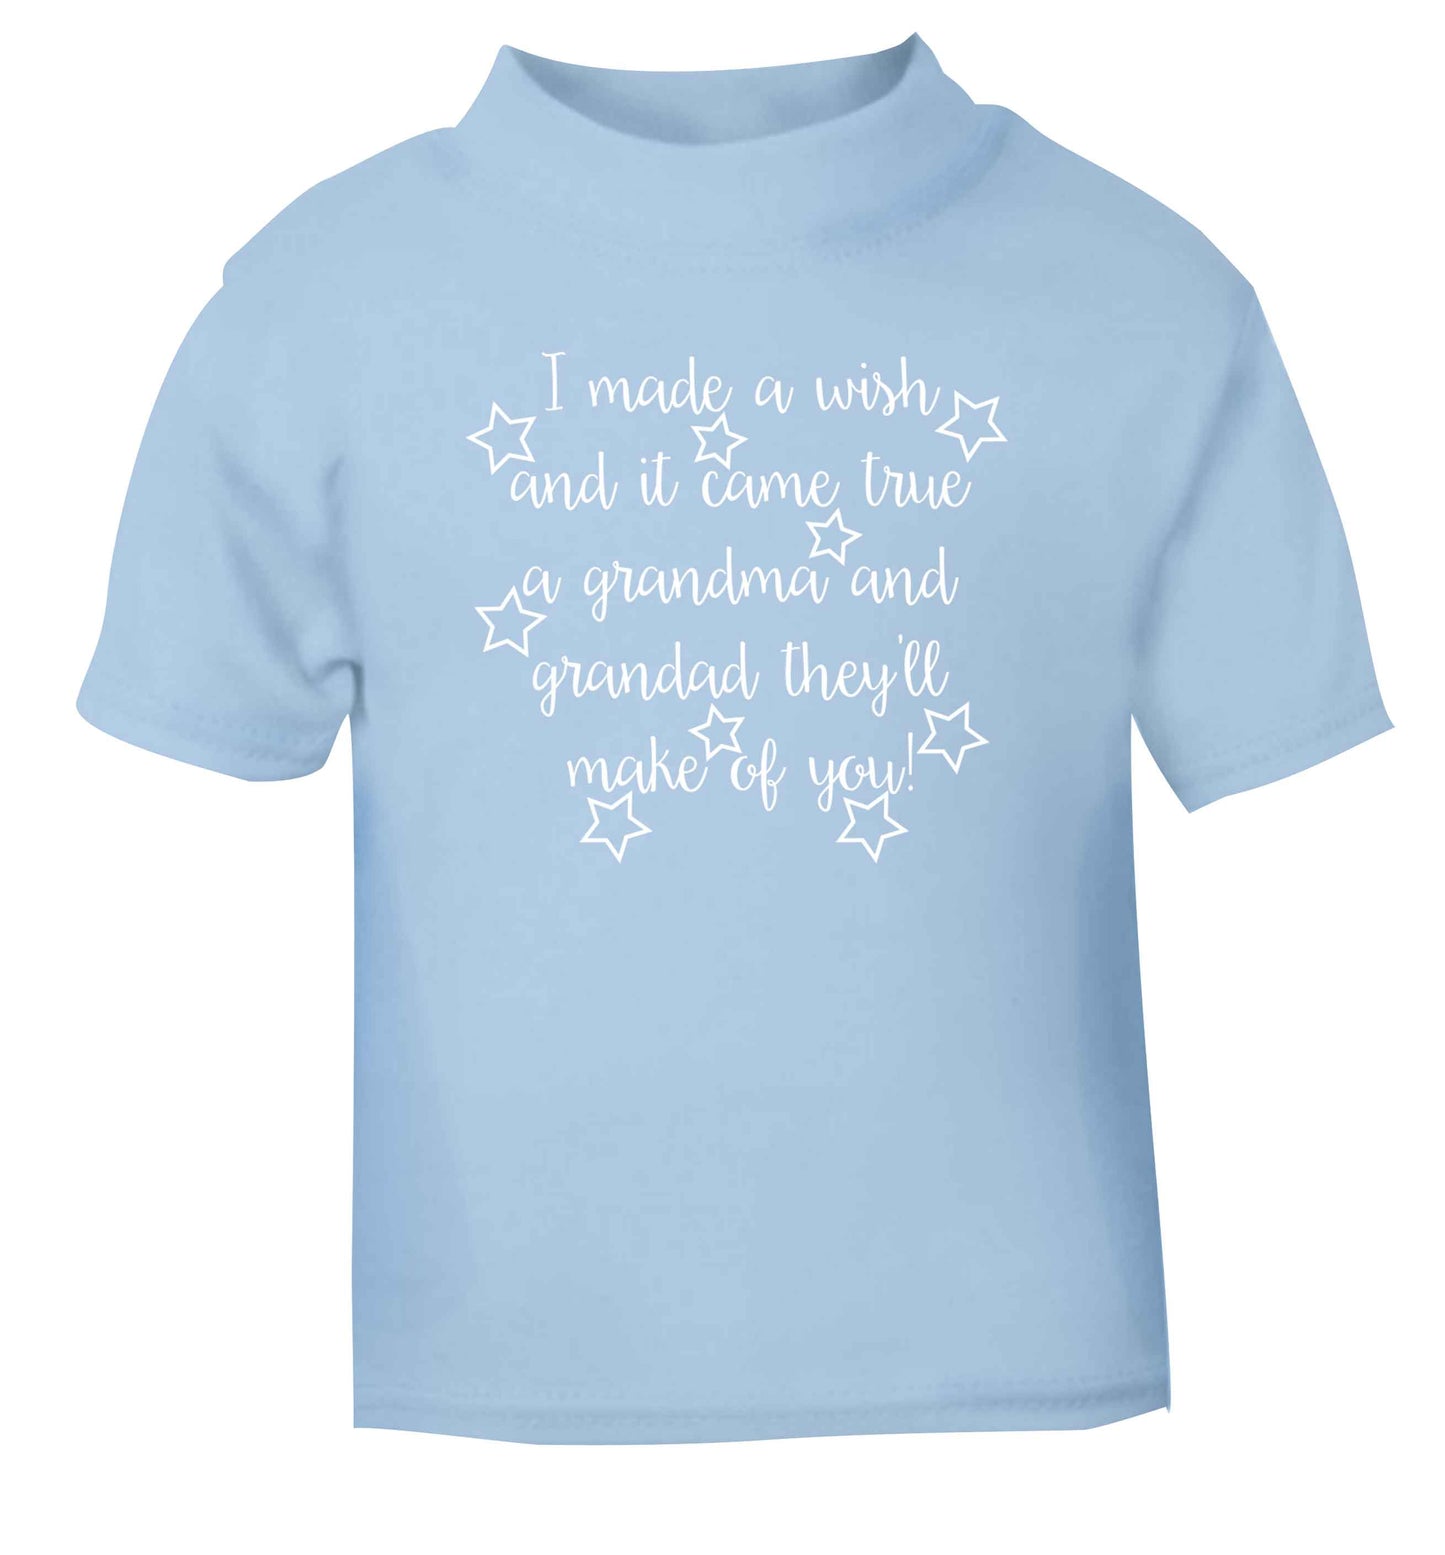 I made a wish and it came true a grandma and grandad they'll make of you! light blue Baby Toddler Tshirt 2 Years